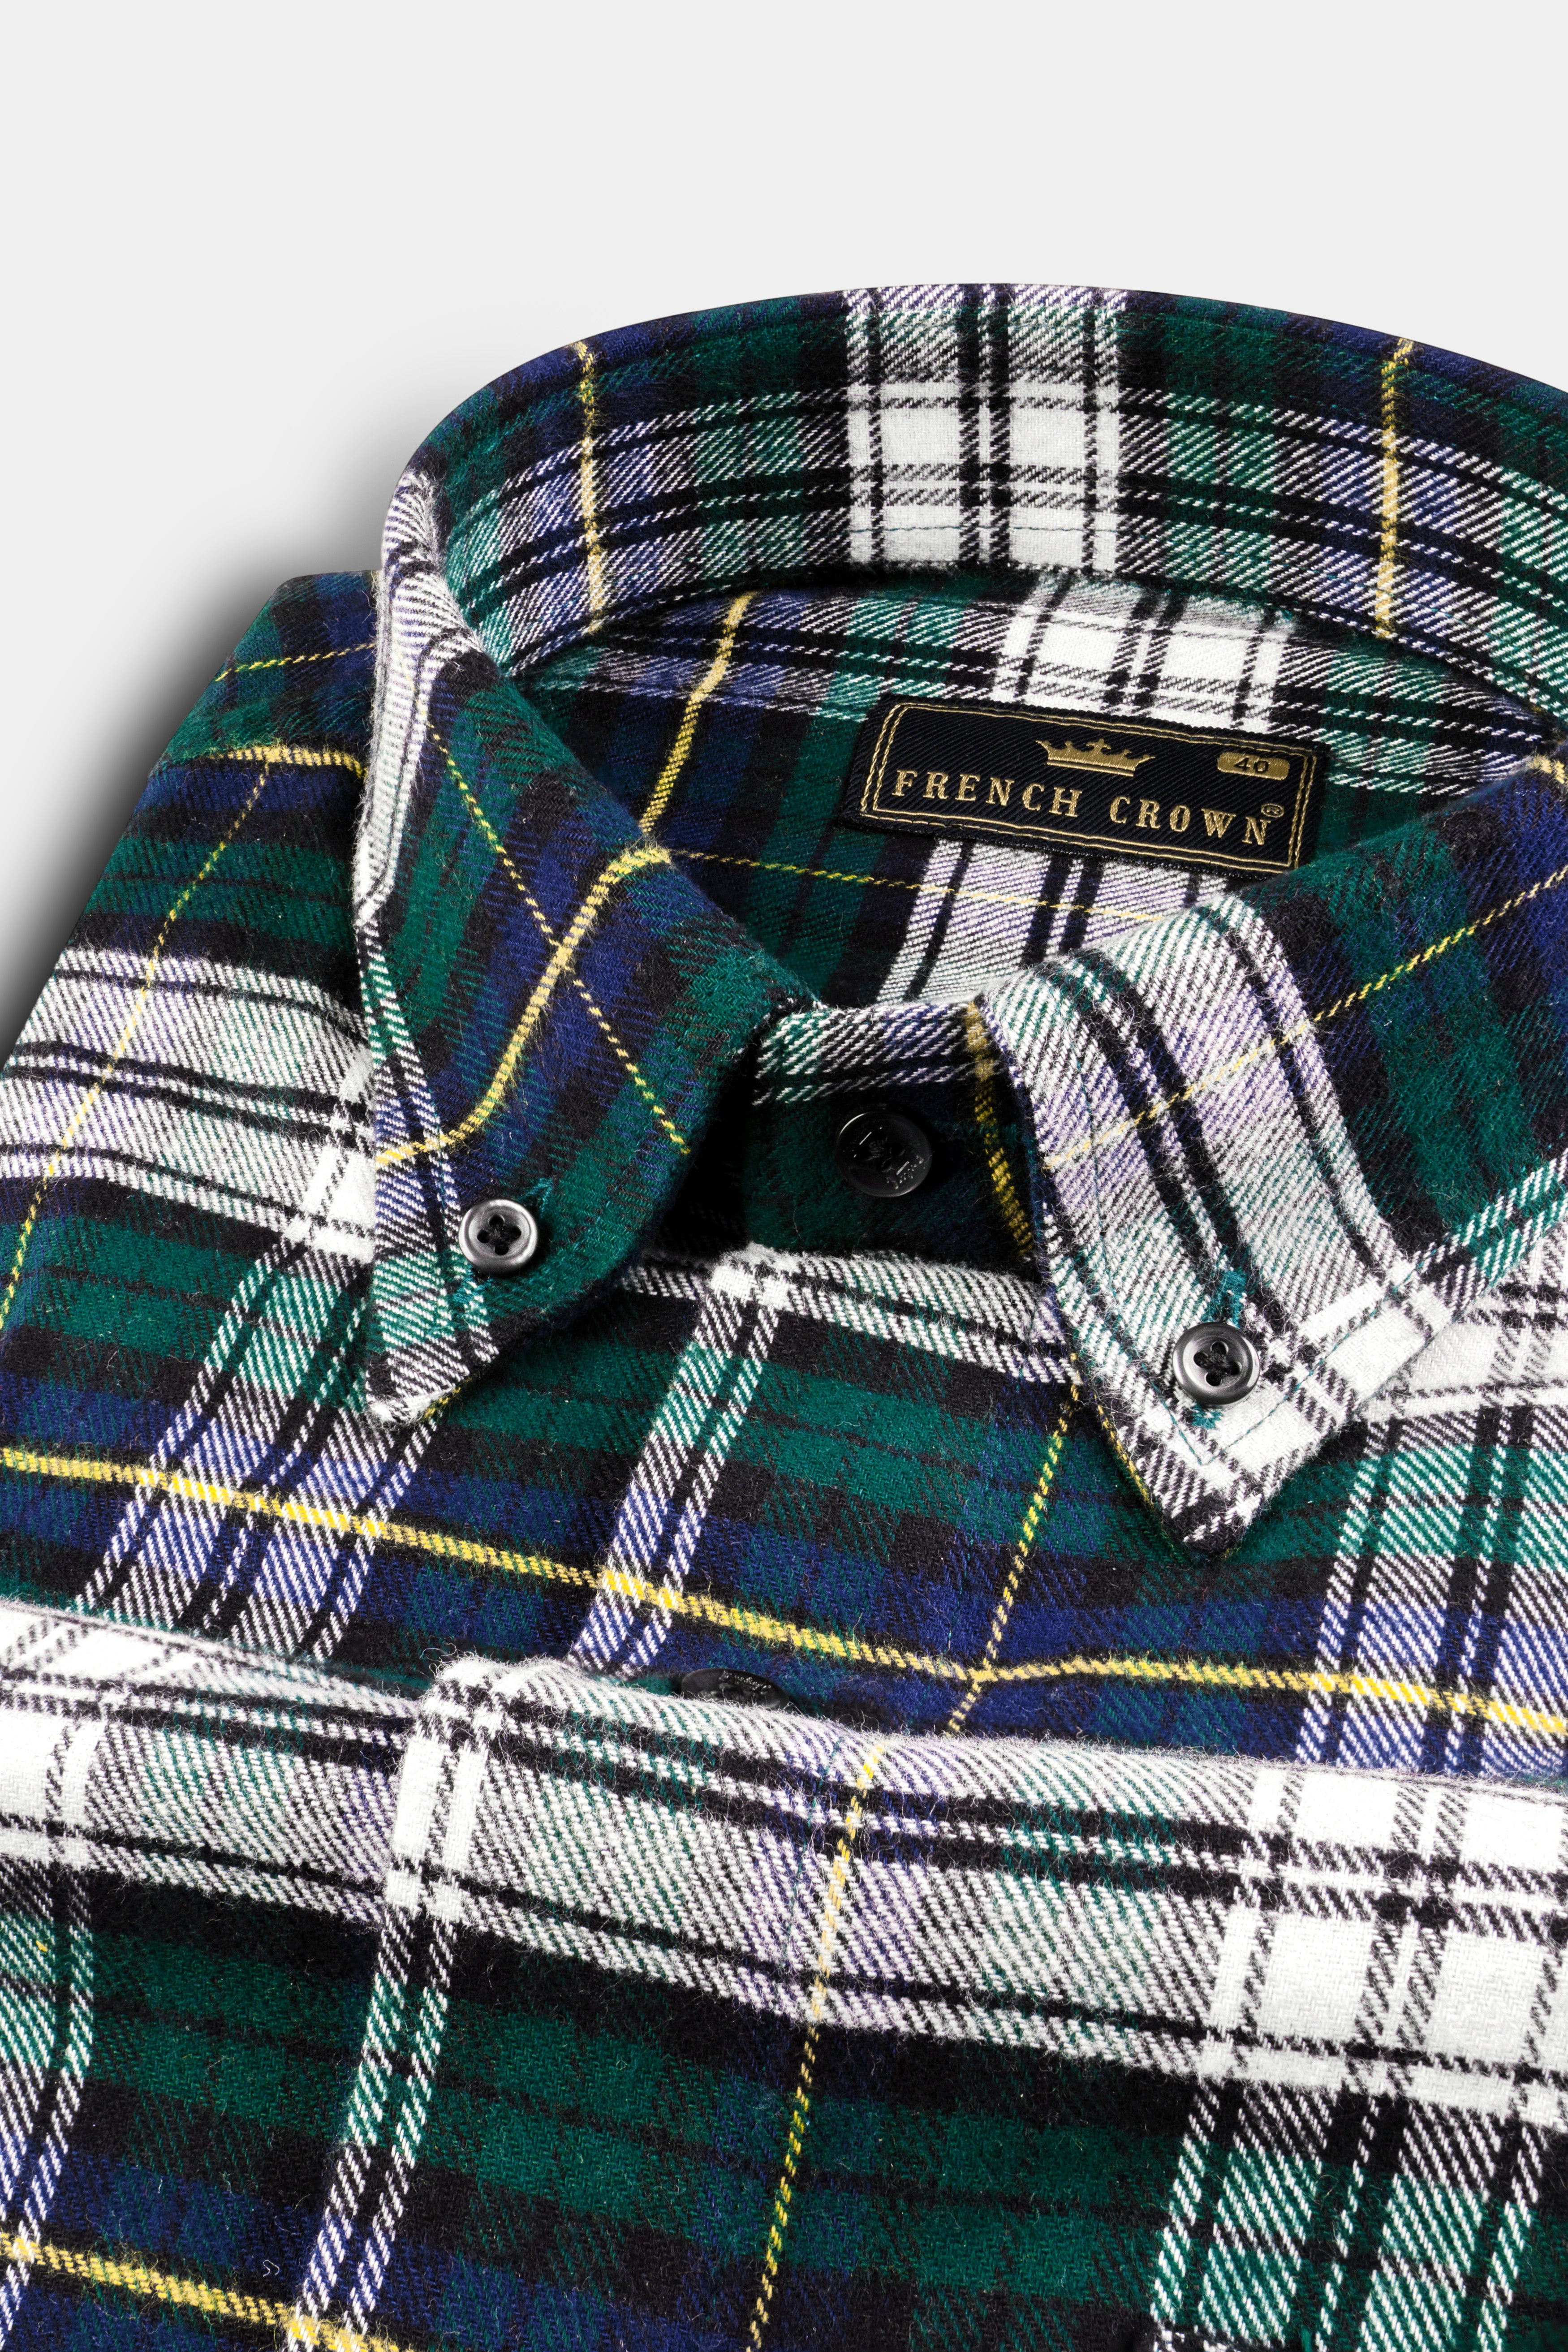 Bright White with Spruce Green Heavyweight Plaid Flannel Shirt